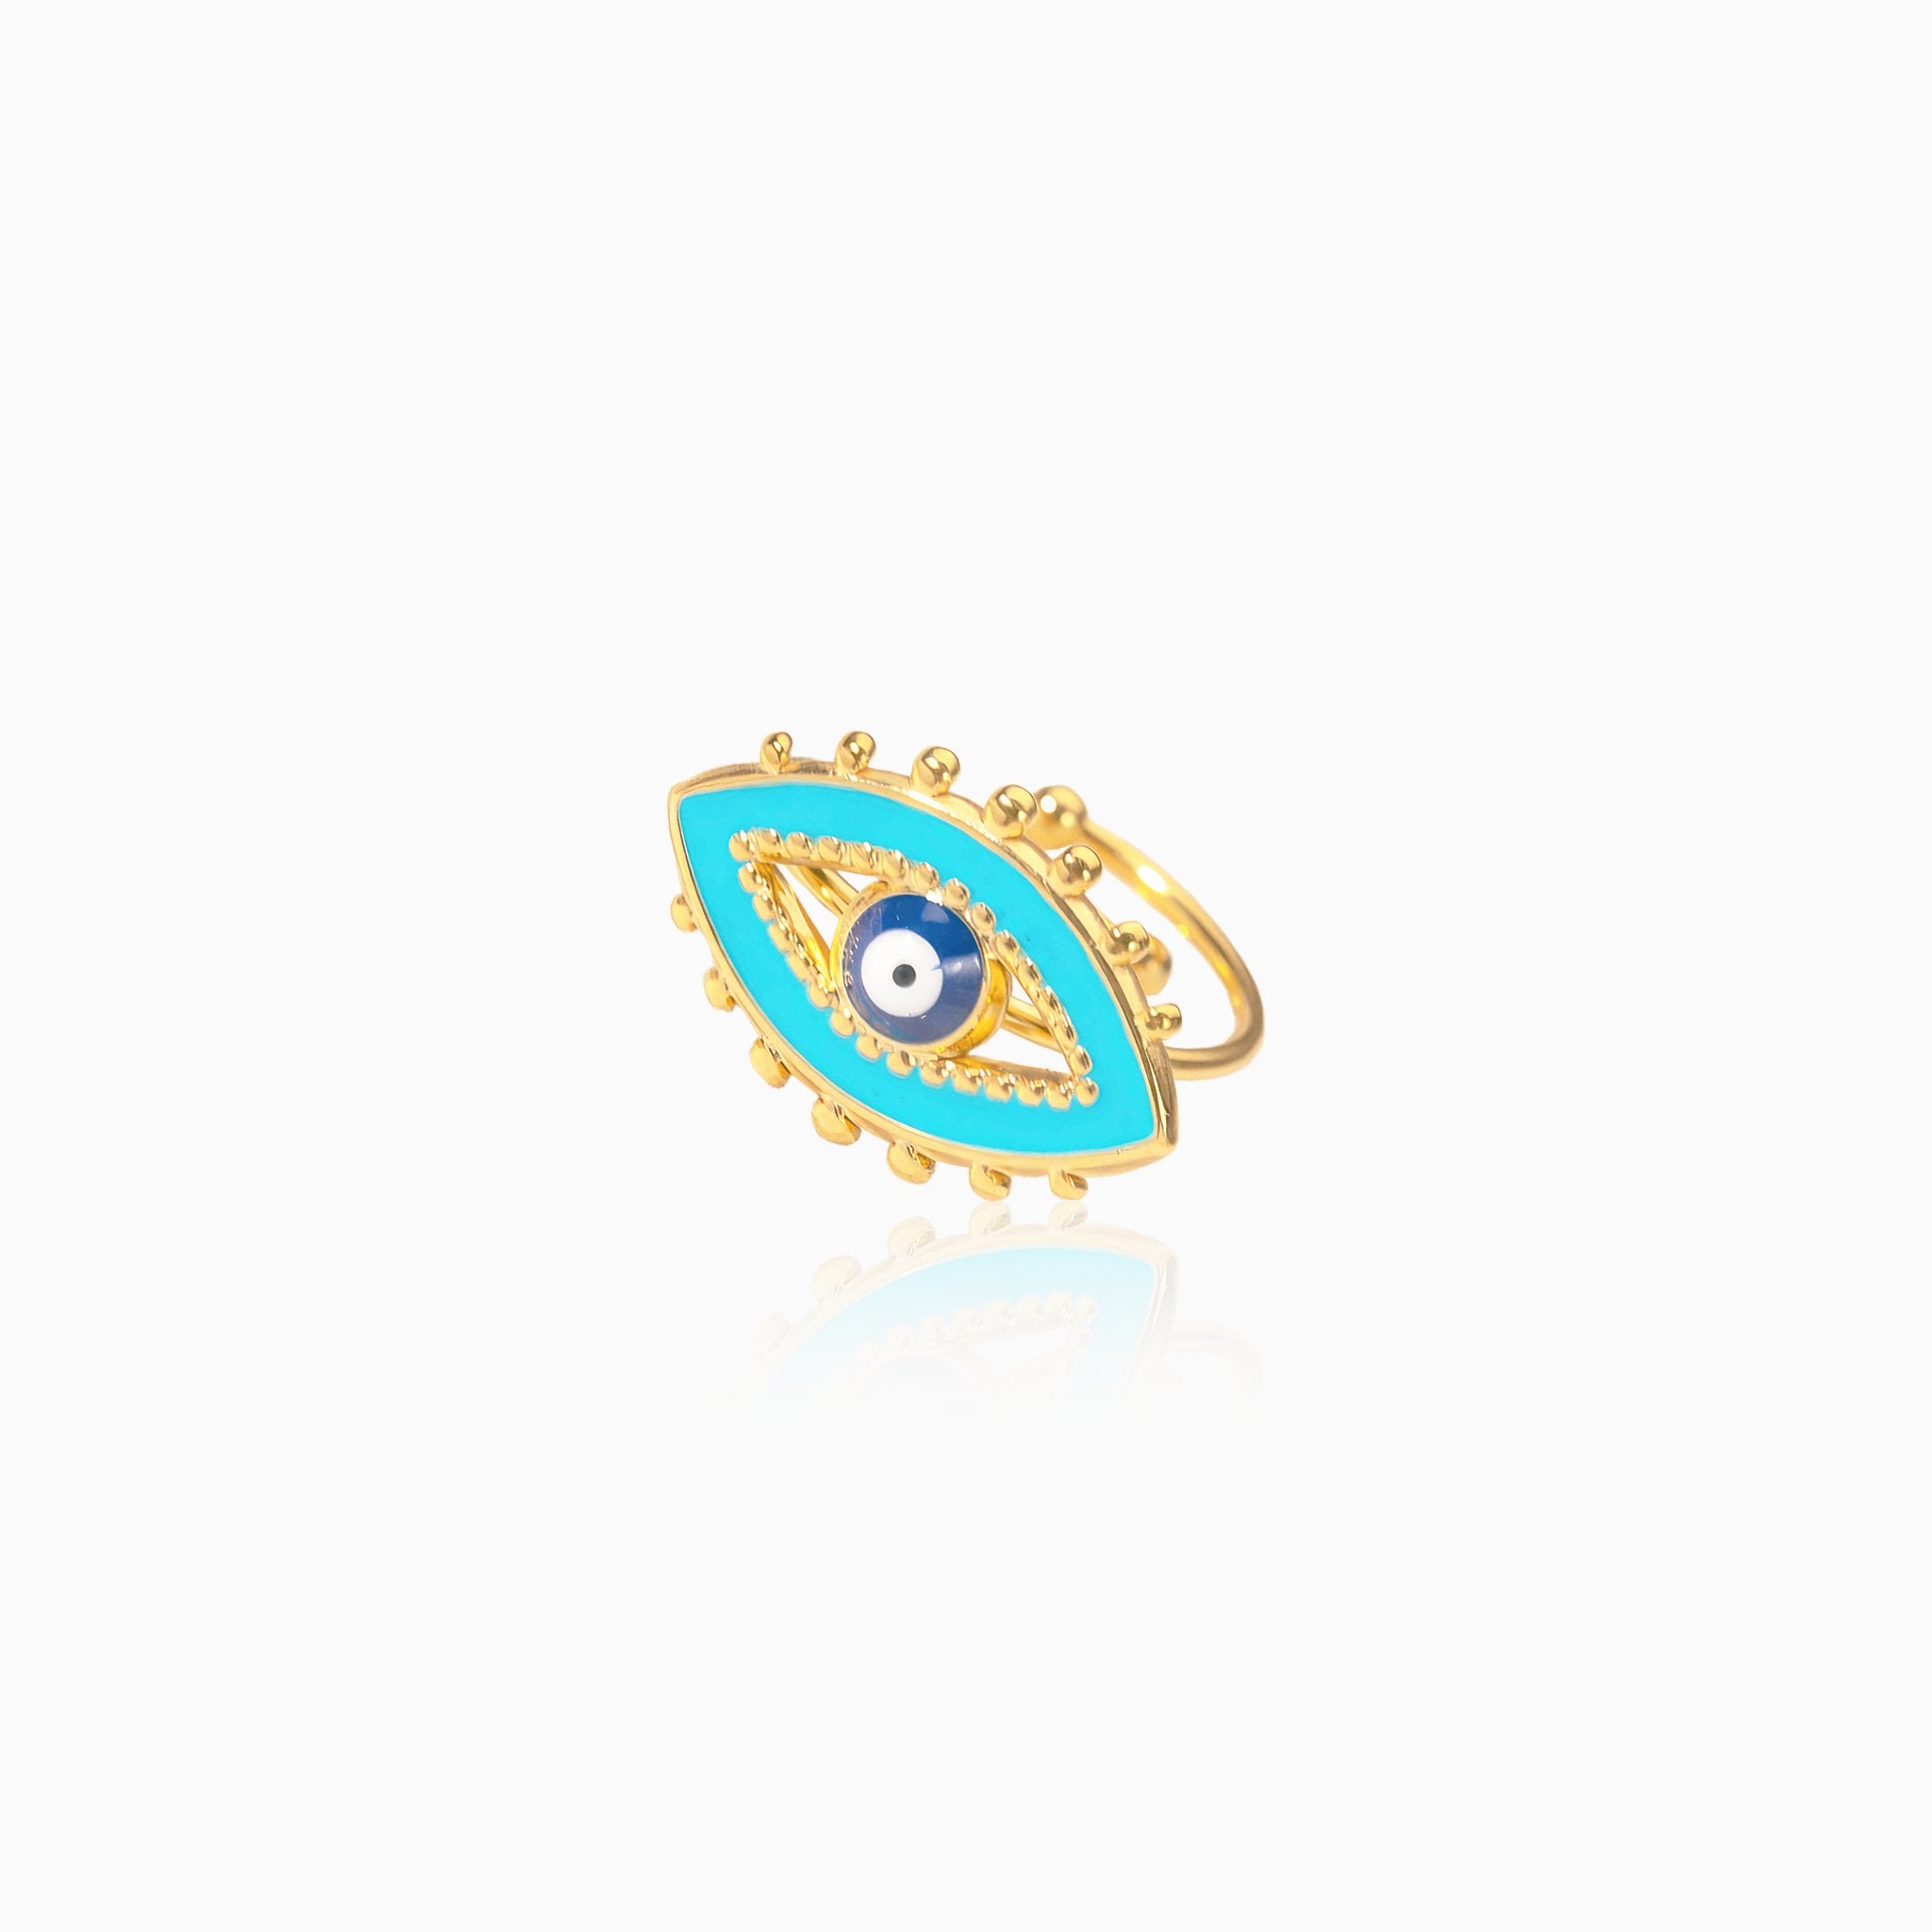 Blue Devil Eye Design Ring - Nobbier - Ring - 18K Gold And Titanium PVD Coated Jewelry